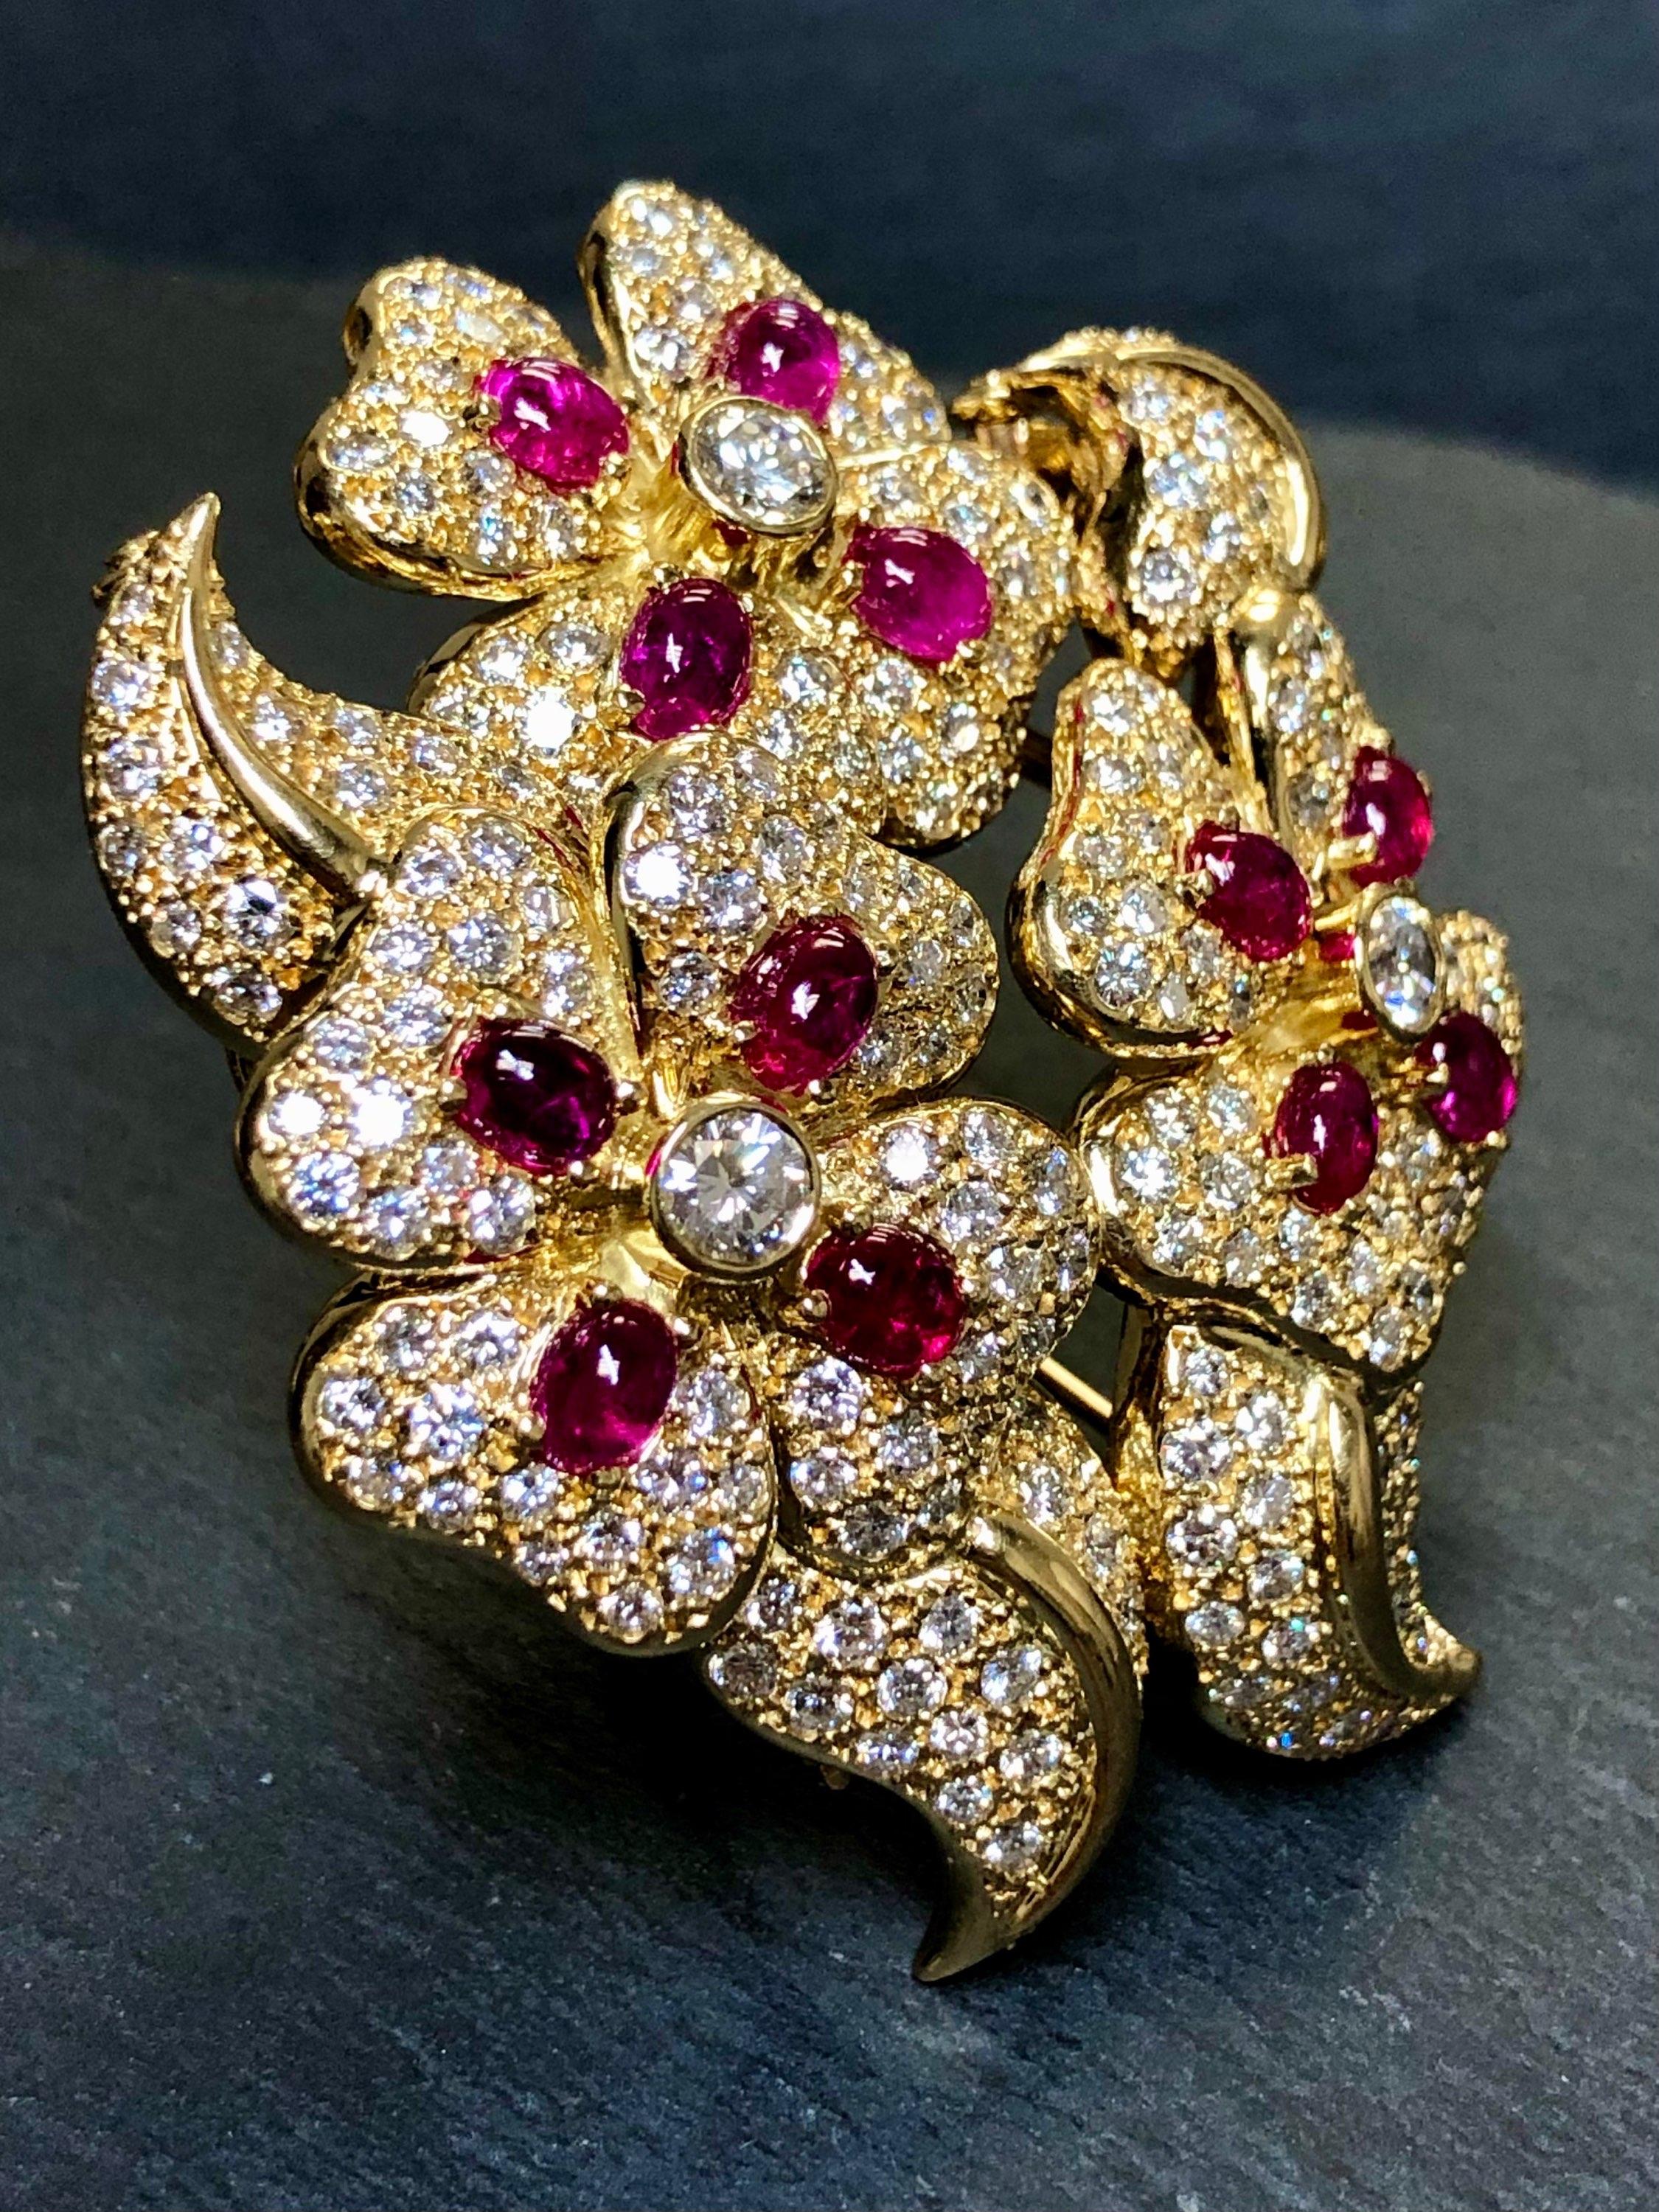 This fabulous brooch has been done in 18K yellow gold and set with approximately 8.50cttw in H-I color and Vs1-2 clarity round diamonds as well as approximately 6cttw in natural cabochon rubies. The unique aspect to this piece is it comes apart and